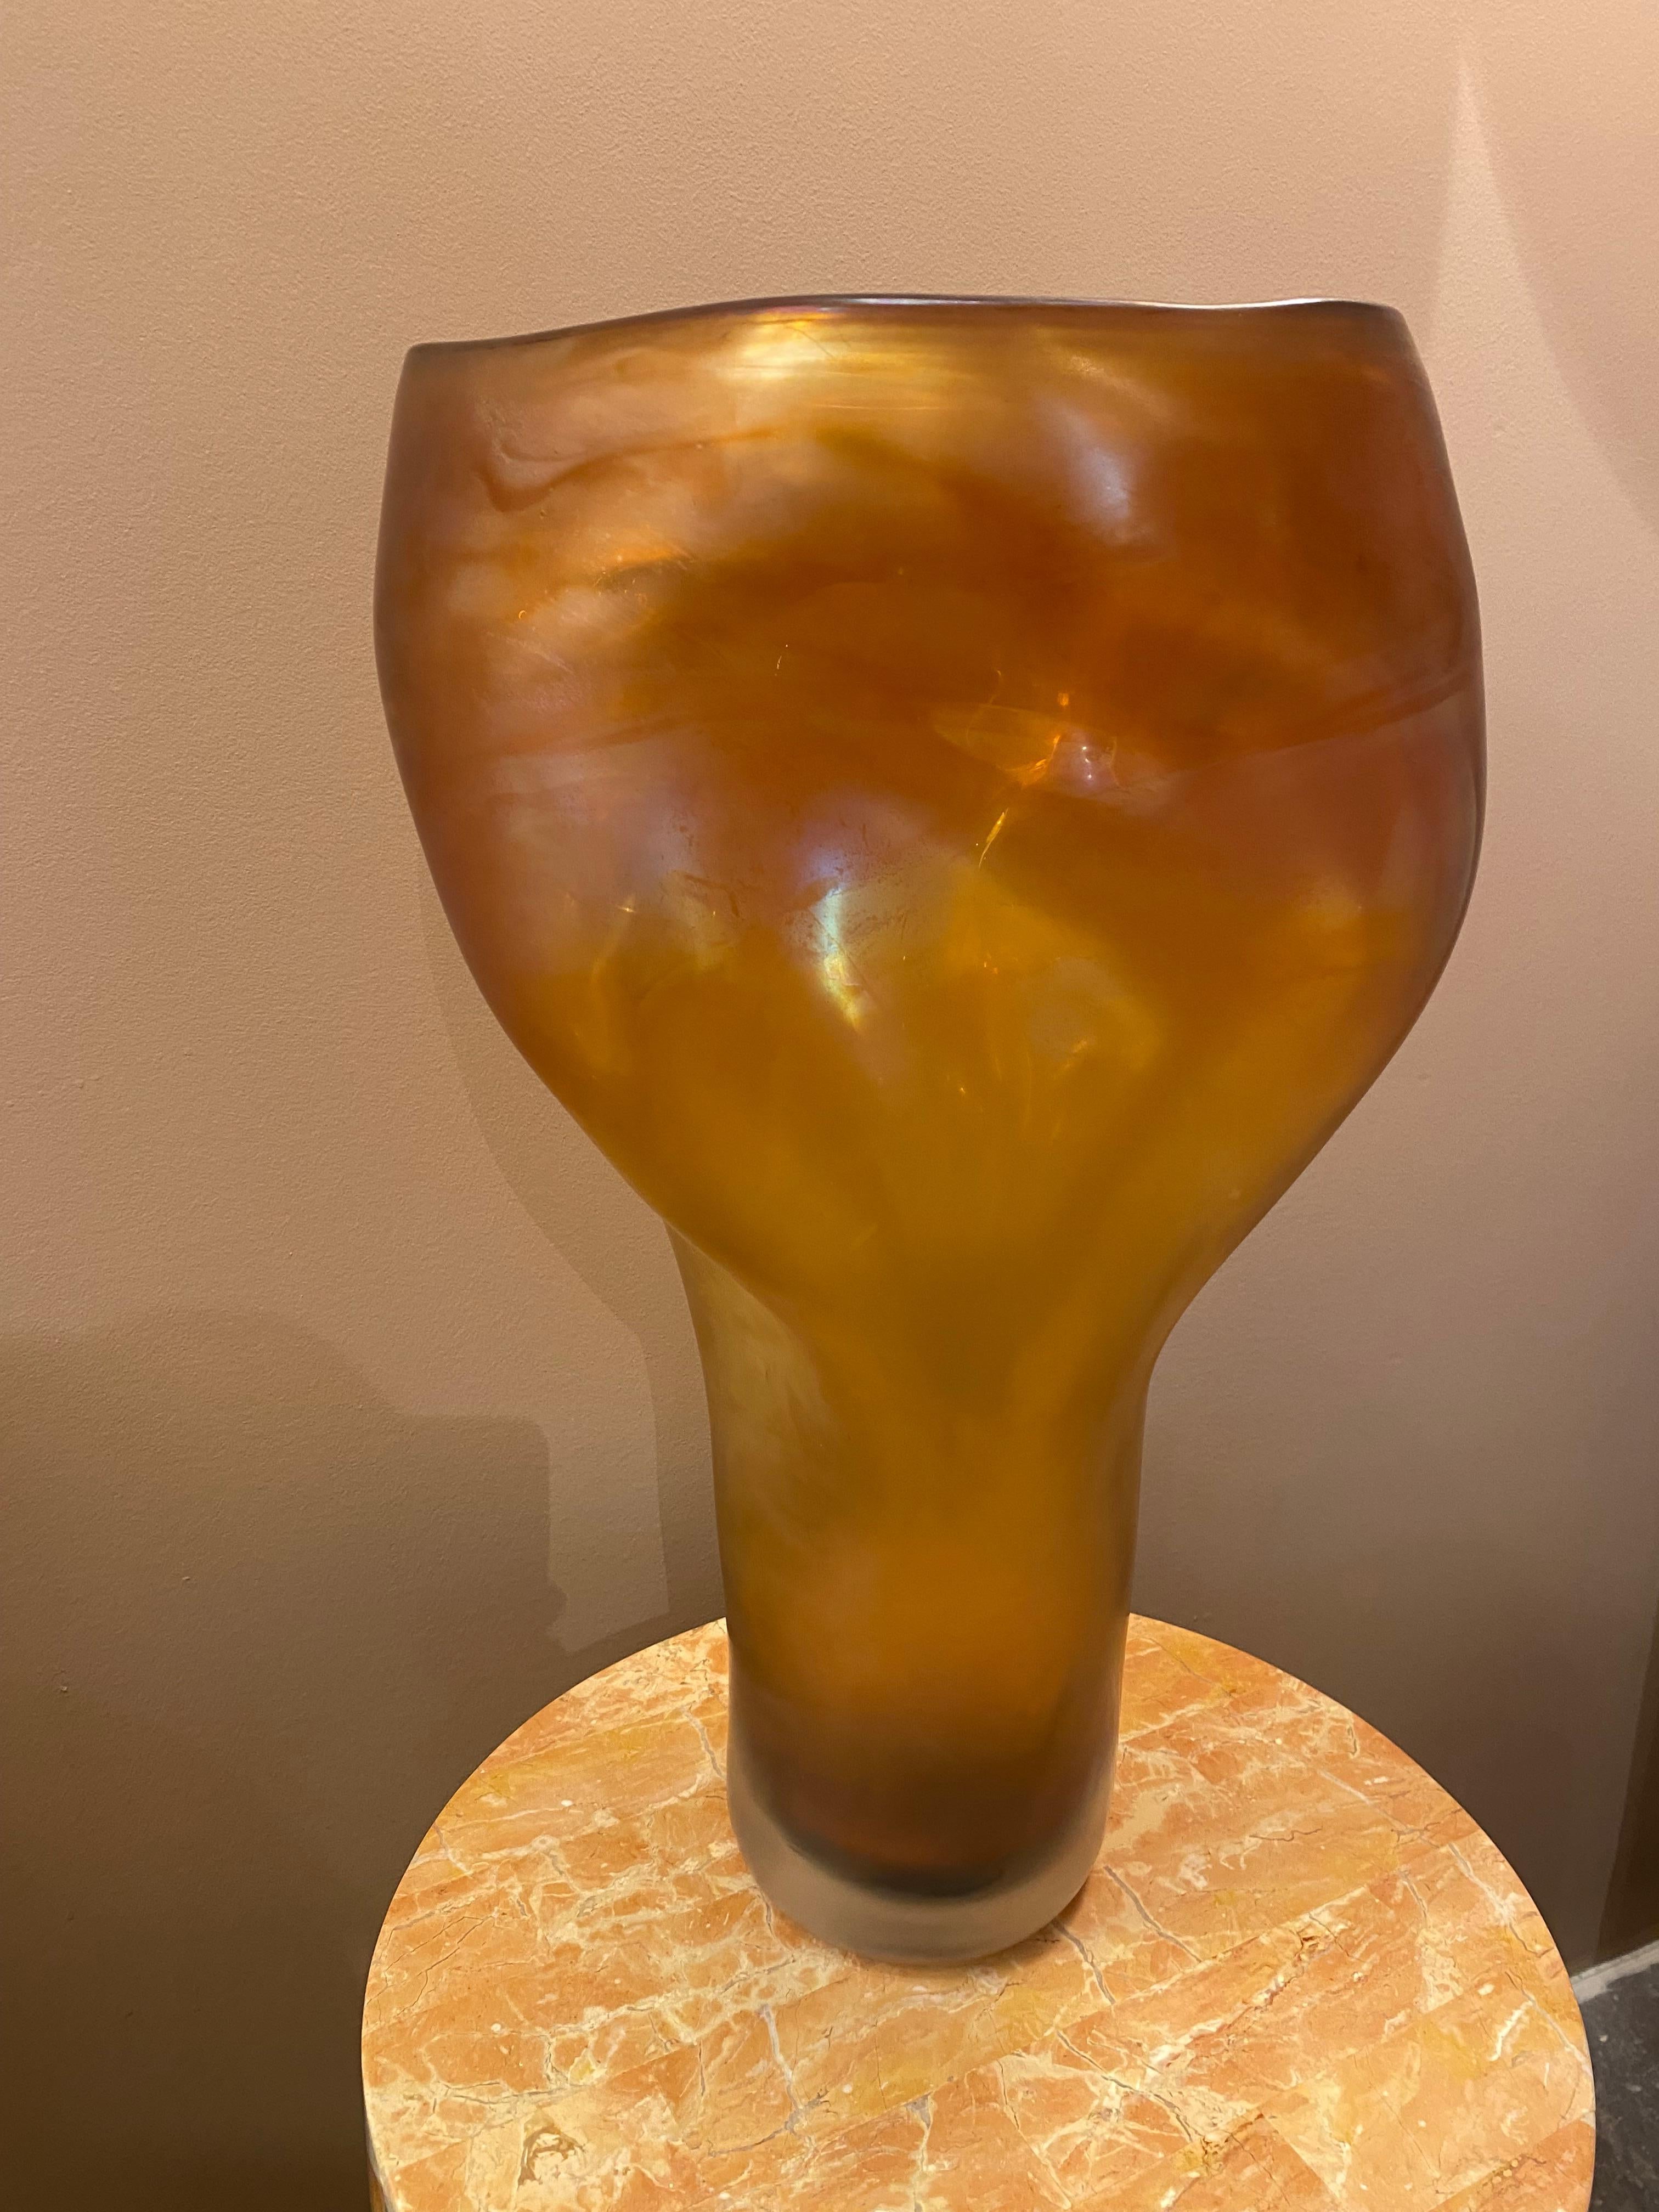 The ALLUNGATO vase is made by Massimo Micheluzzi using the process of Iridazione (to make a surface iridescent) that gives the glass a visual pearl-like effect. This chemical process is generated when the glass is still soft and